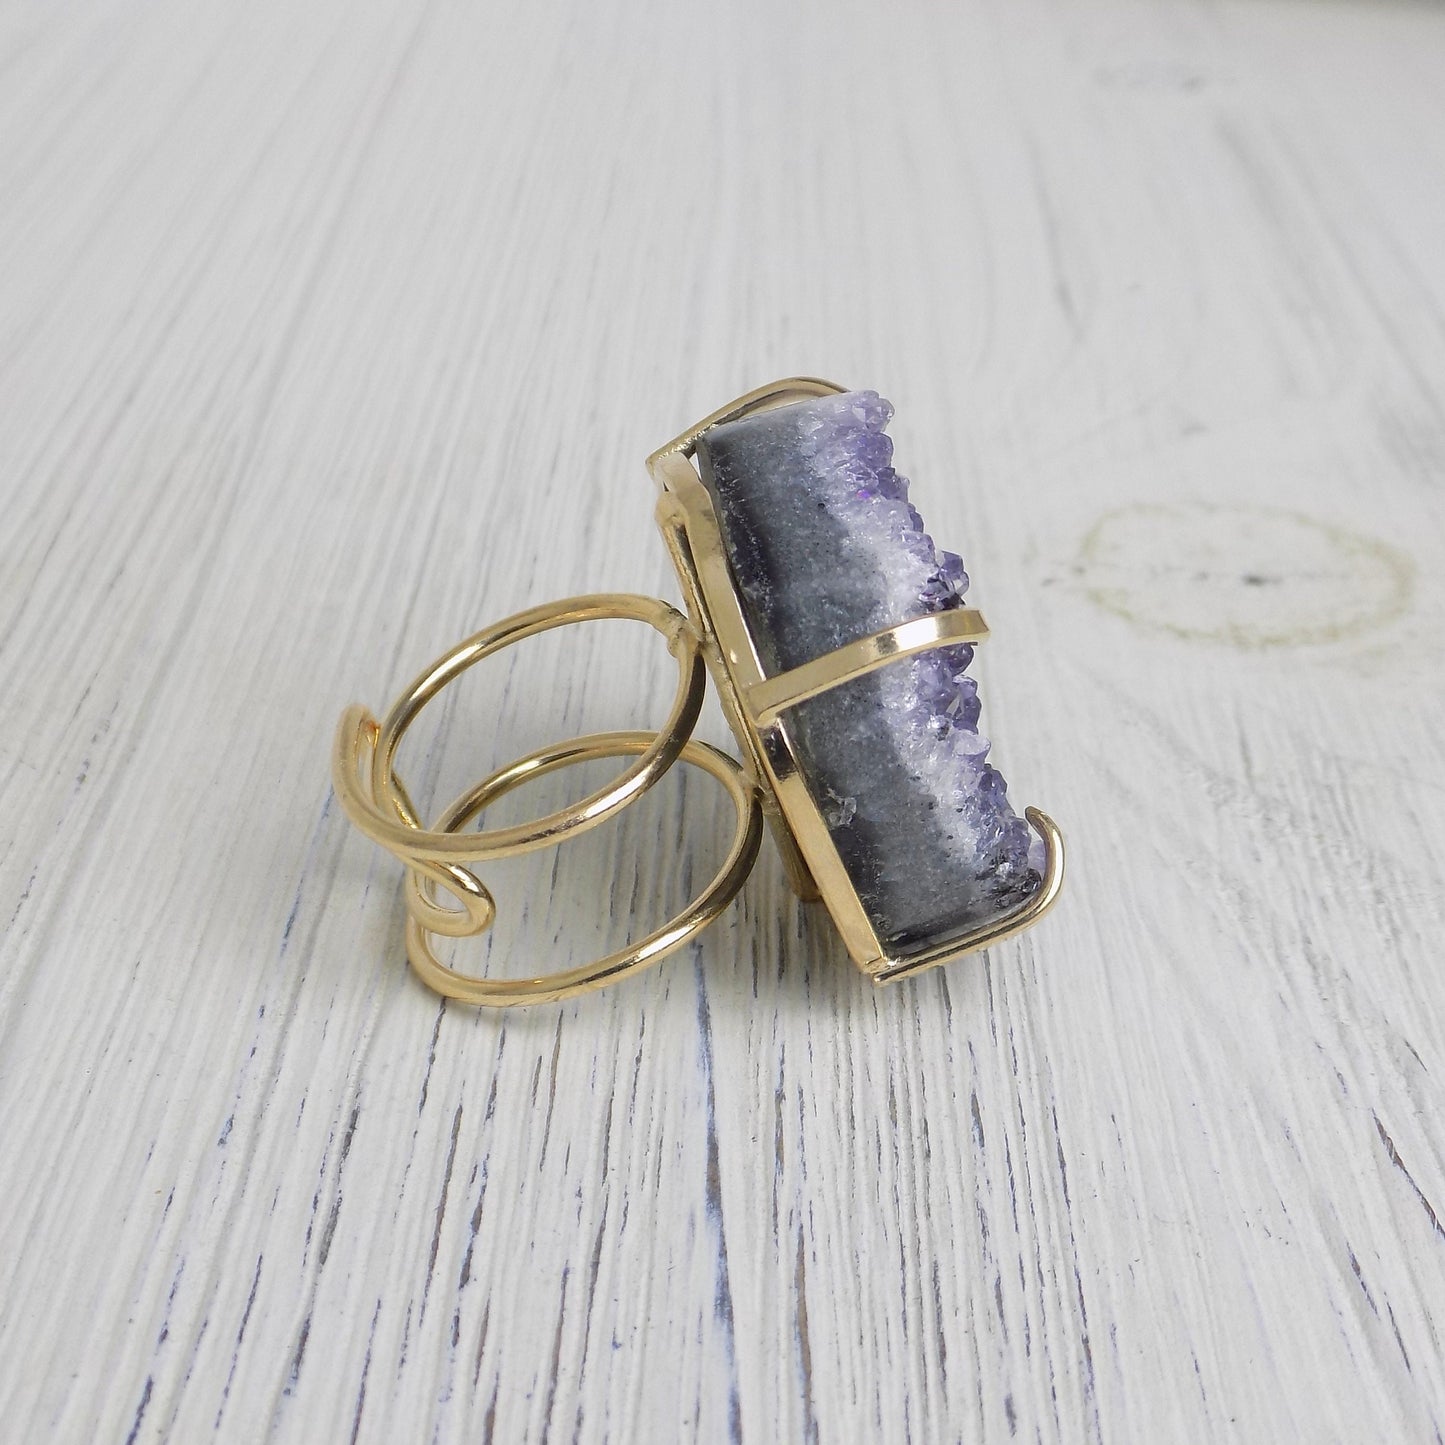 Large Raw Amethyst Statement Ring For Women, Gold Plated Adjustable, Gifts For Mom, G14-22